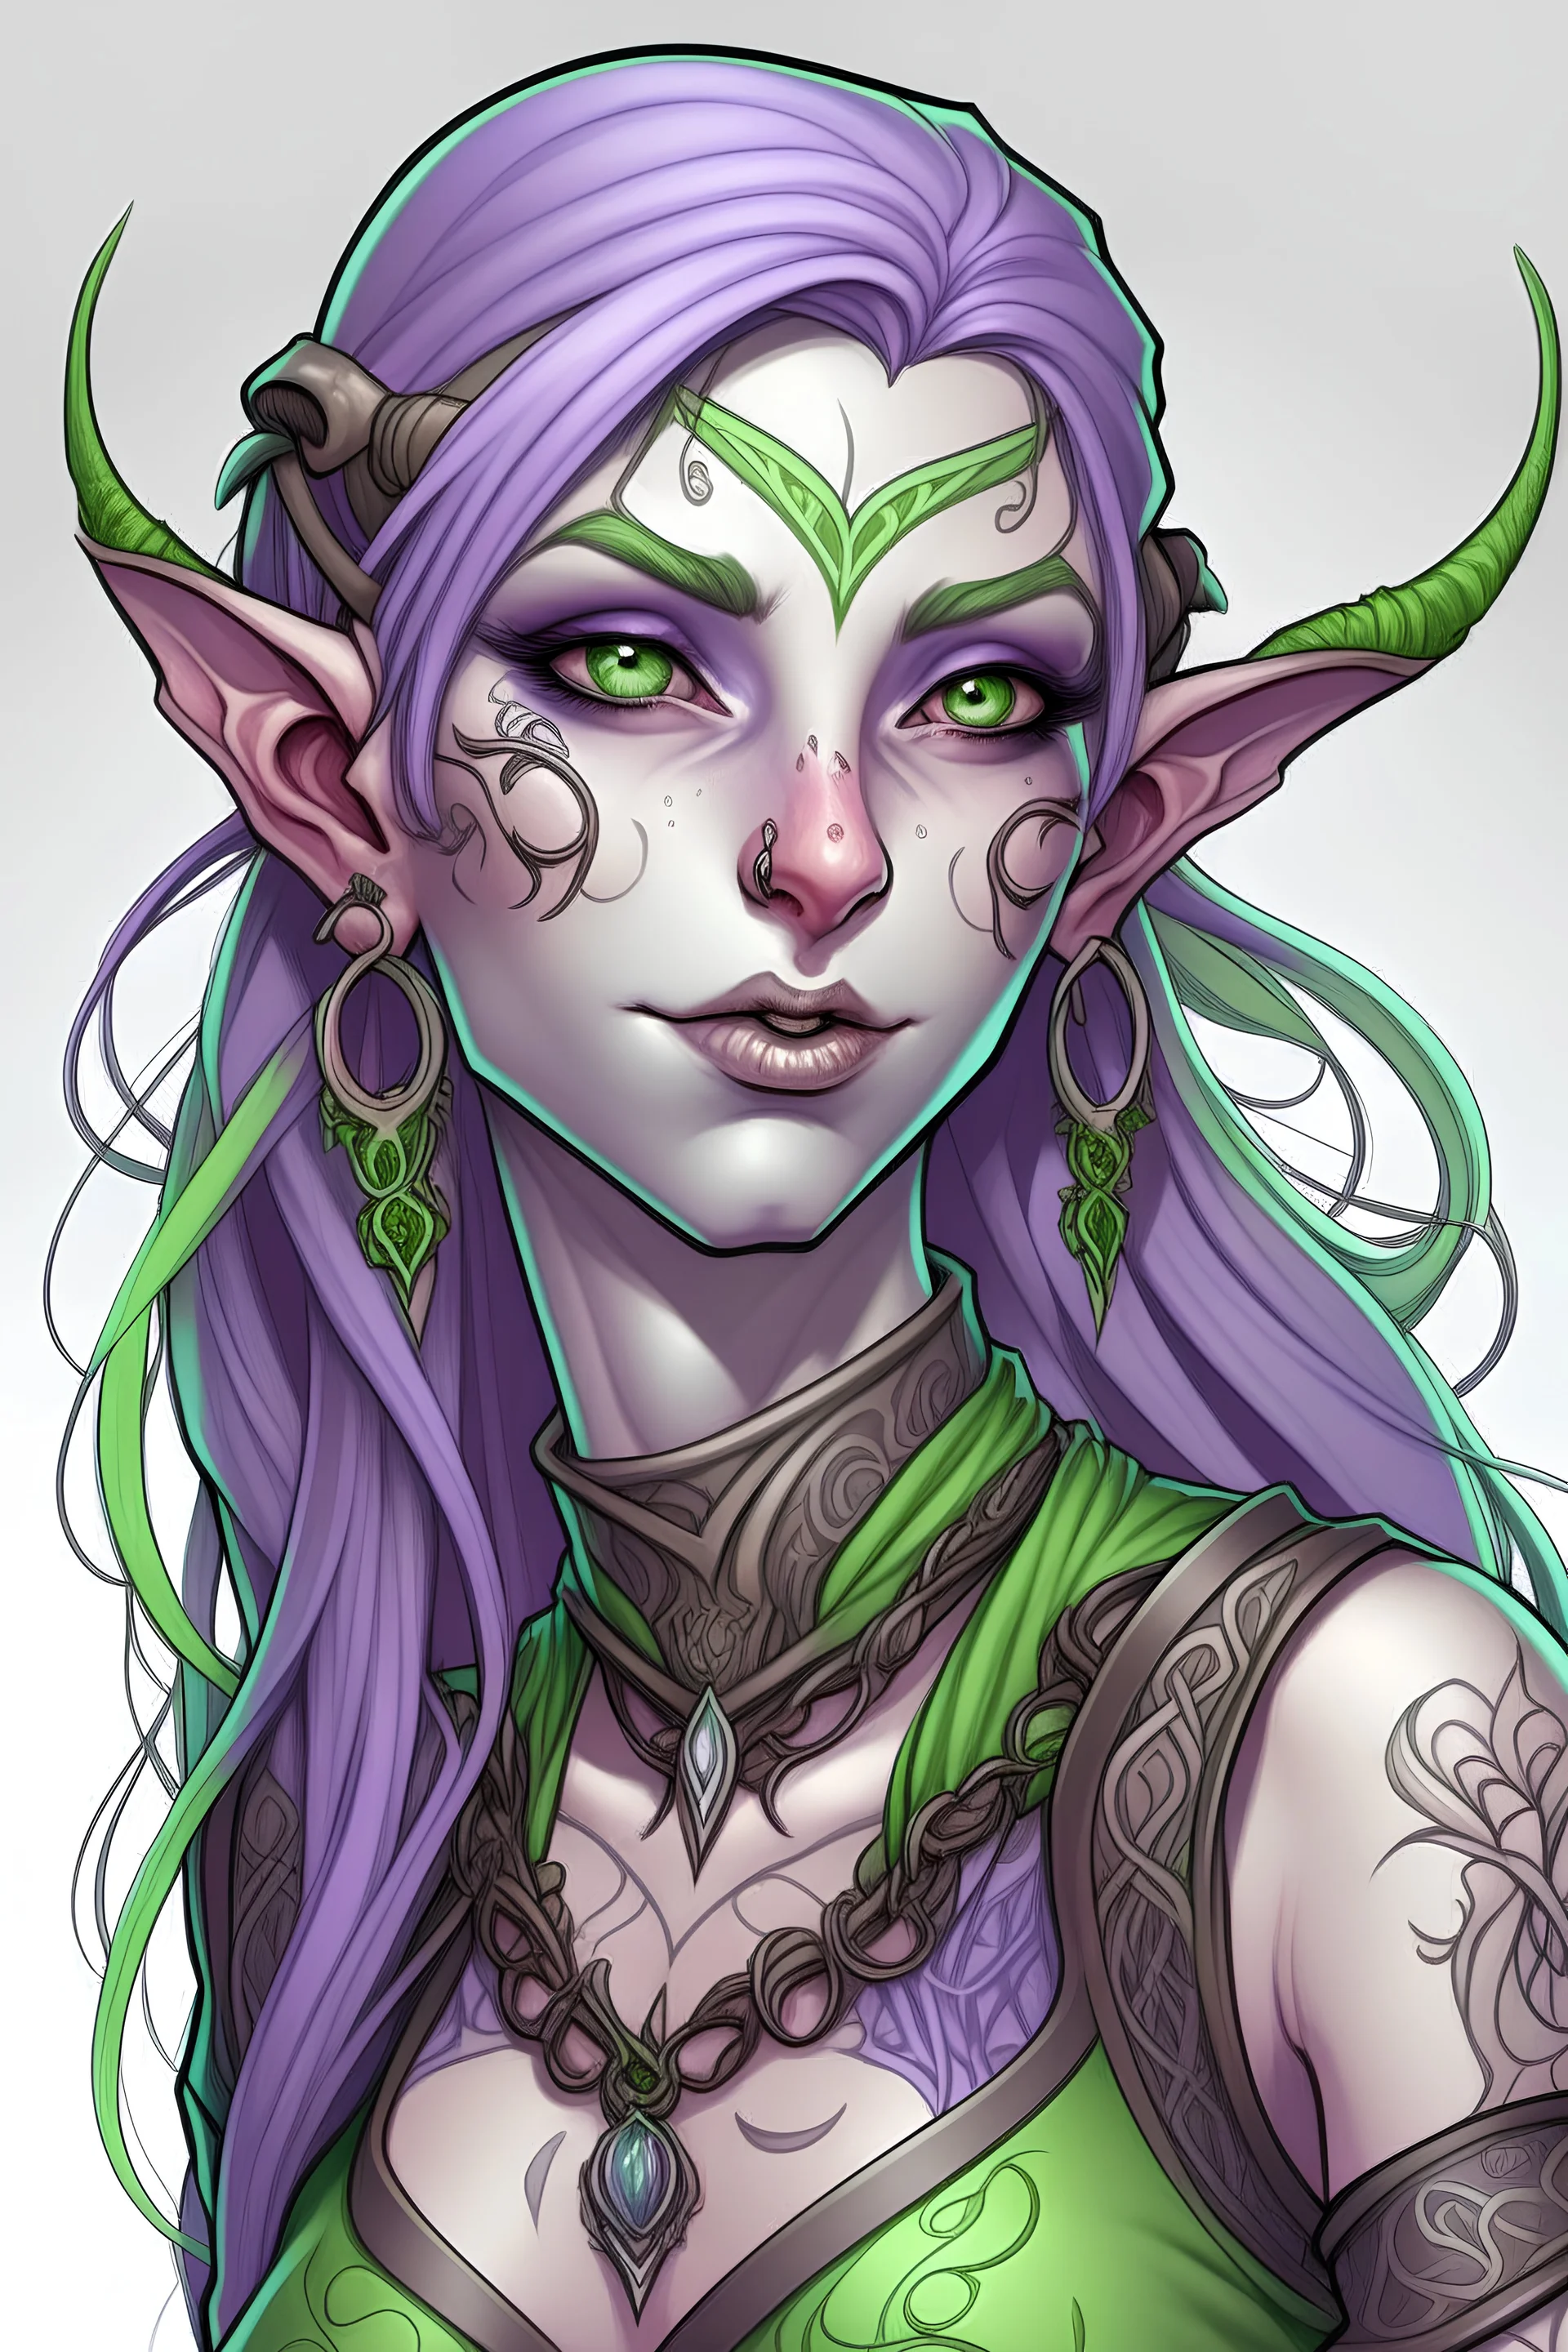 Generate a female elf with pale green skin, purple flowing hair and a few tribal tattoos on her face.